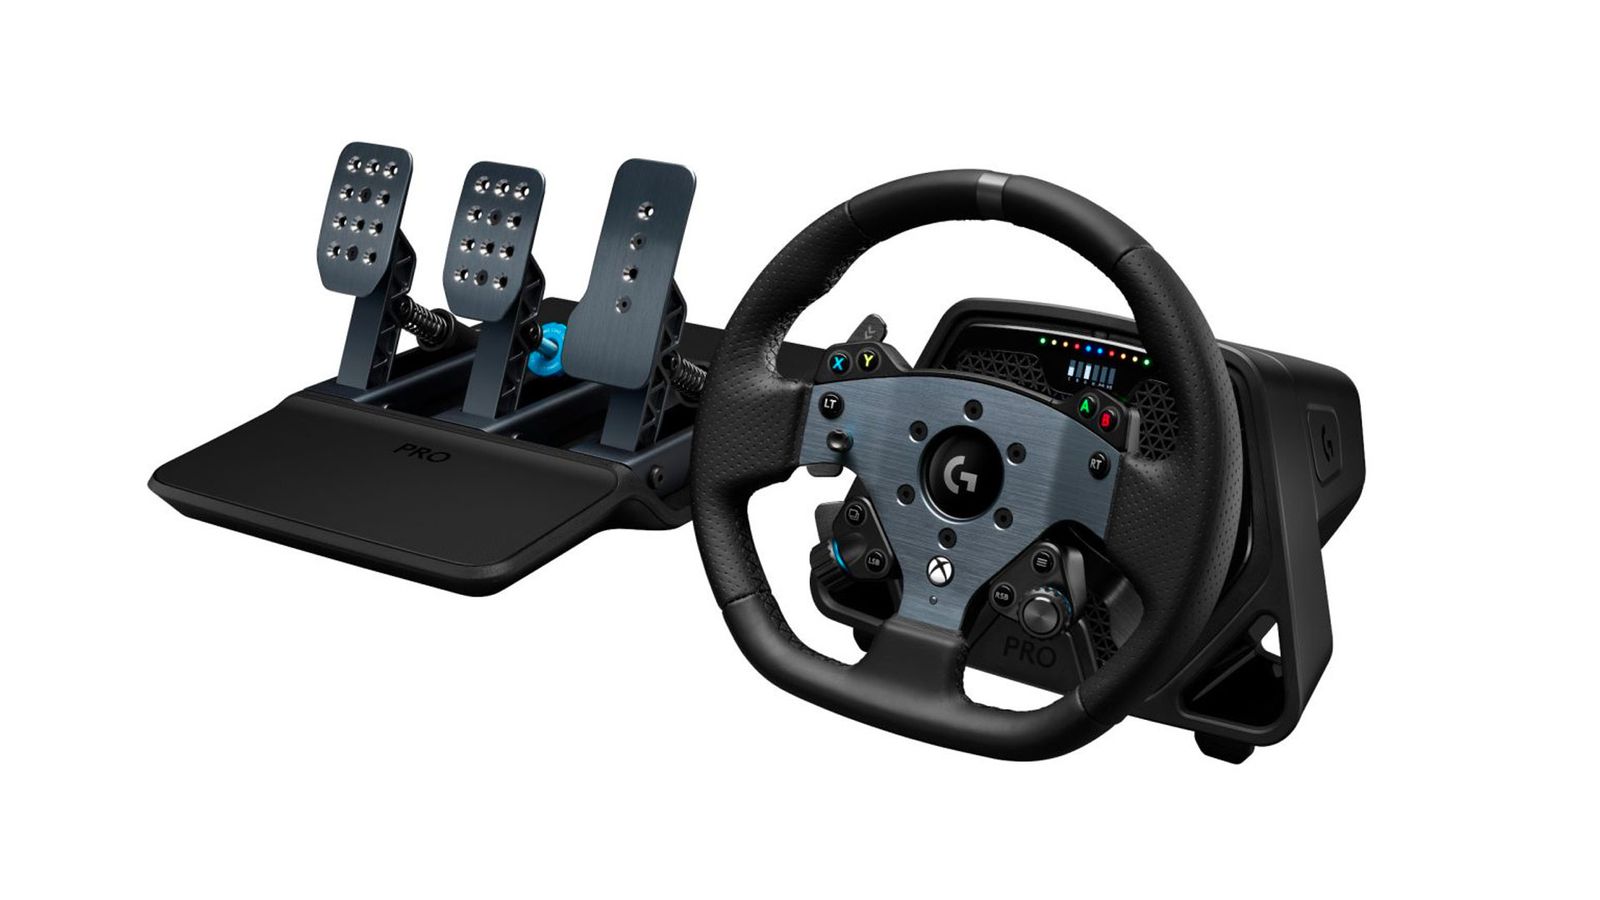 Logitech G PRO Racing Wheel and Pedals product image of a black racing wheel next to a set of black pedals.